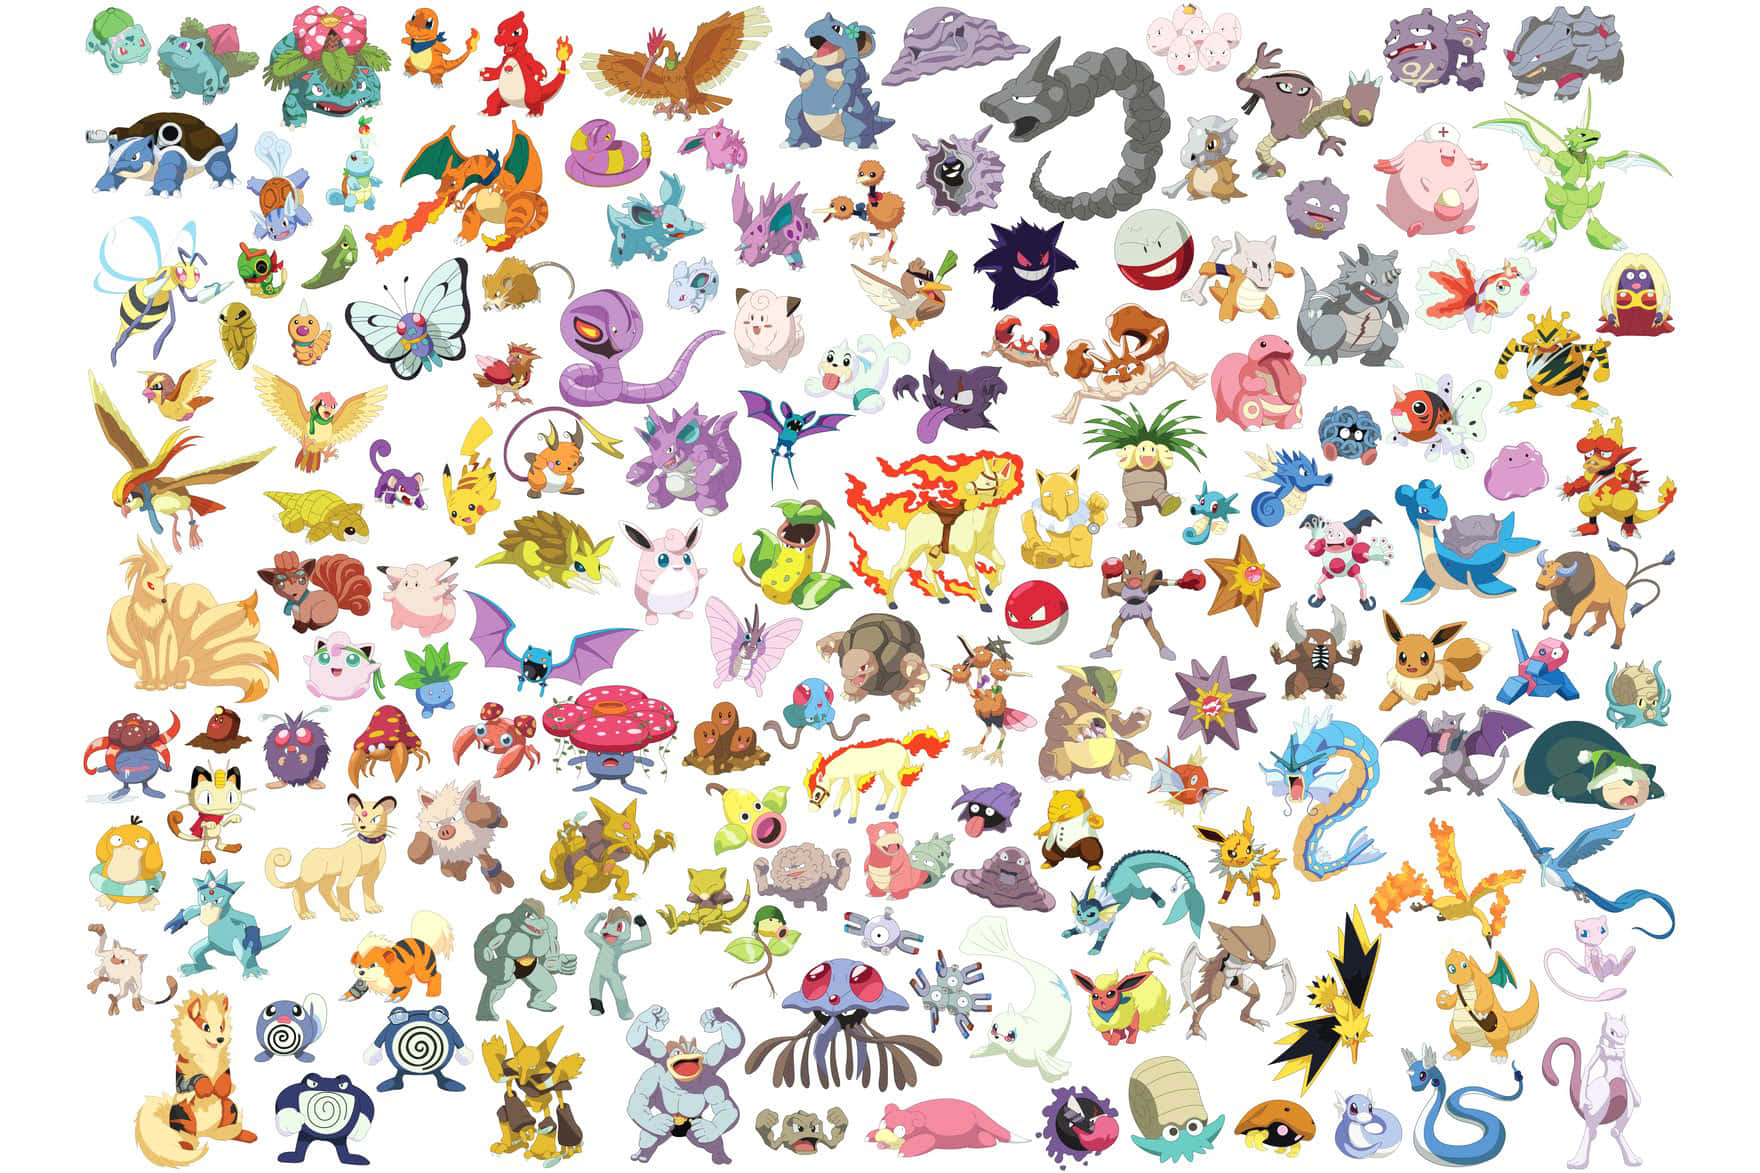 Download Pokemon - The Complete List Of Pokemon | Wallpapers.com